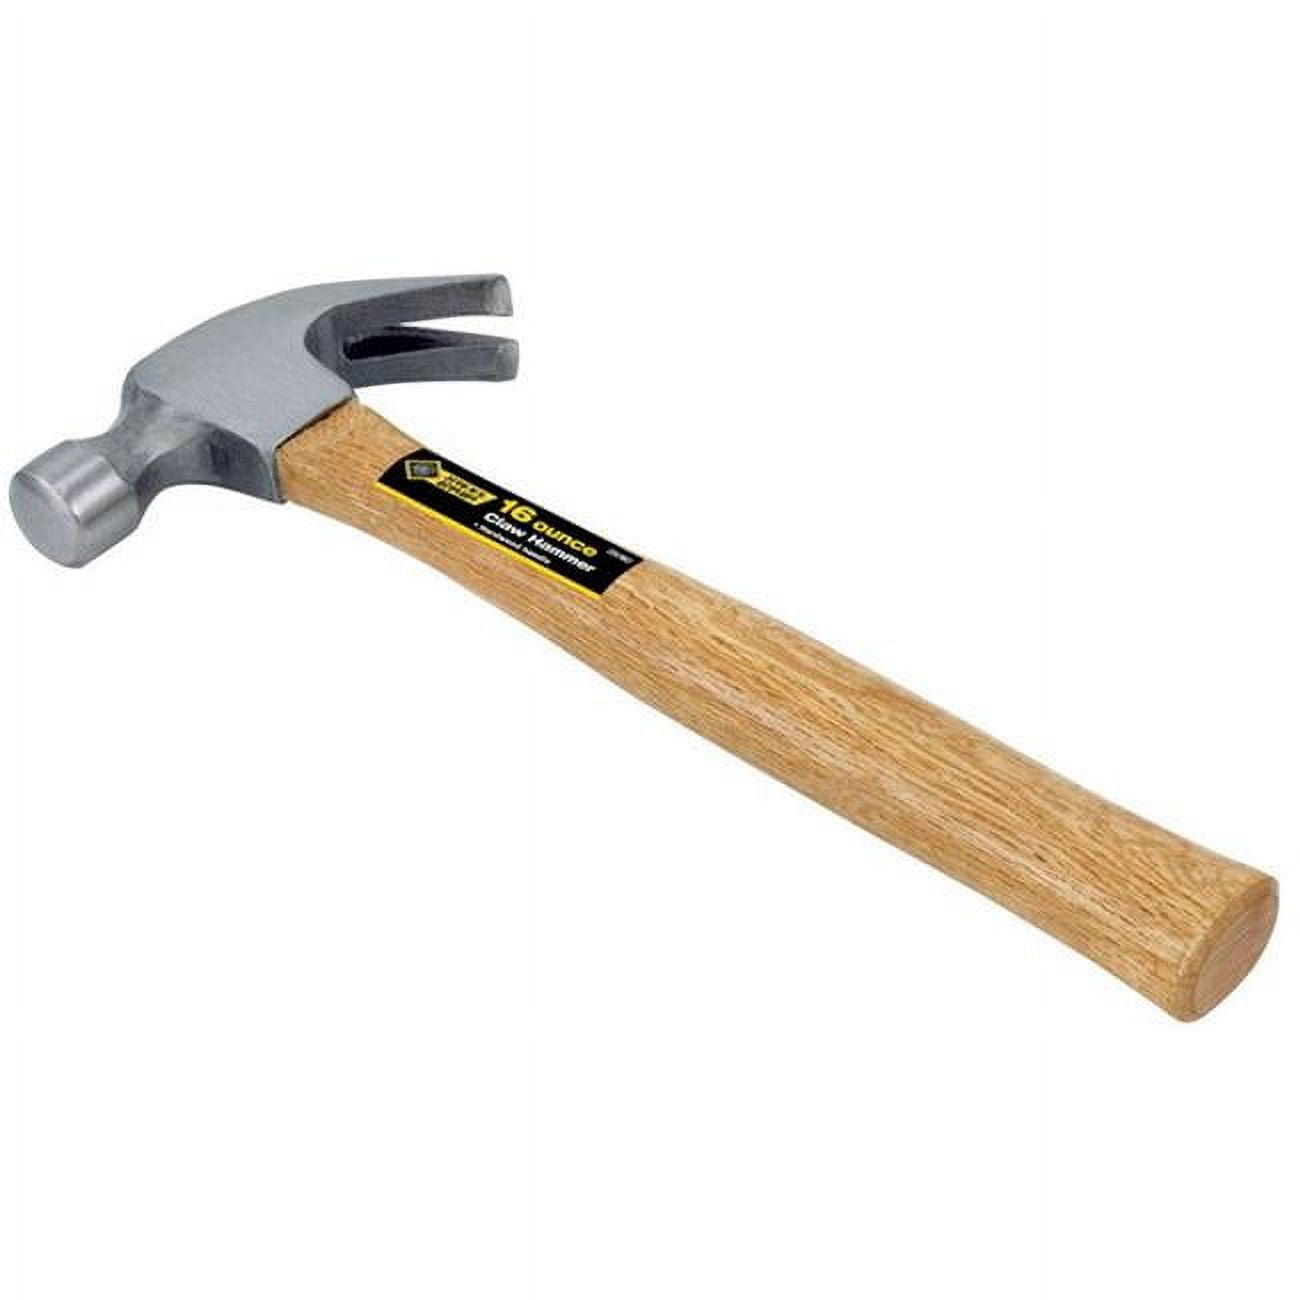 Warwood Tool 45621 3 lb Cold Cutting Chisel, 16 Hickory Handle